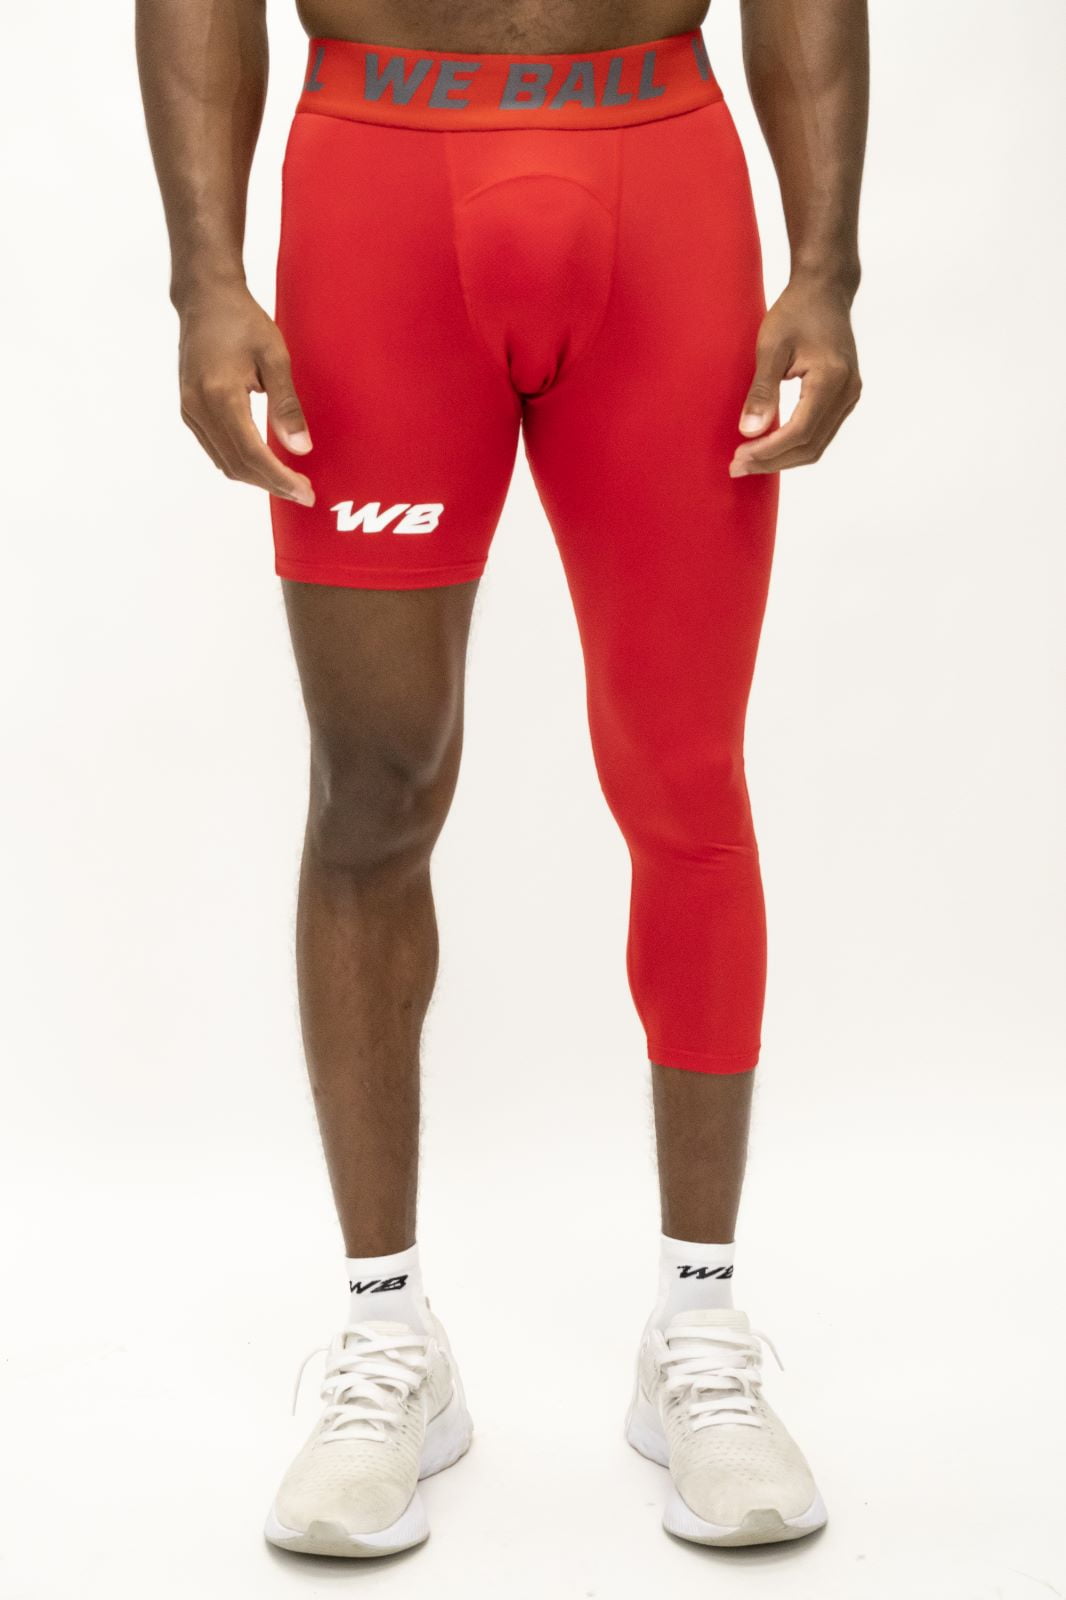 Compression Hosiery|men's Compression 3/4 Leggings - Running, Football,  Basketball Tights